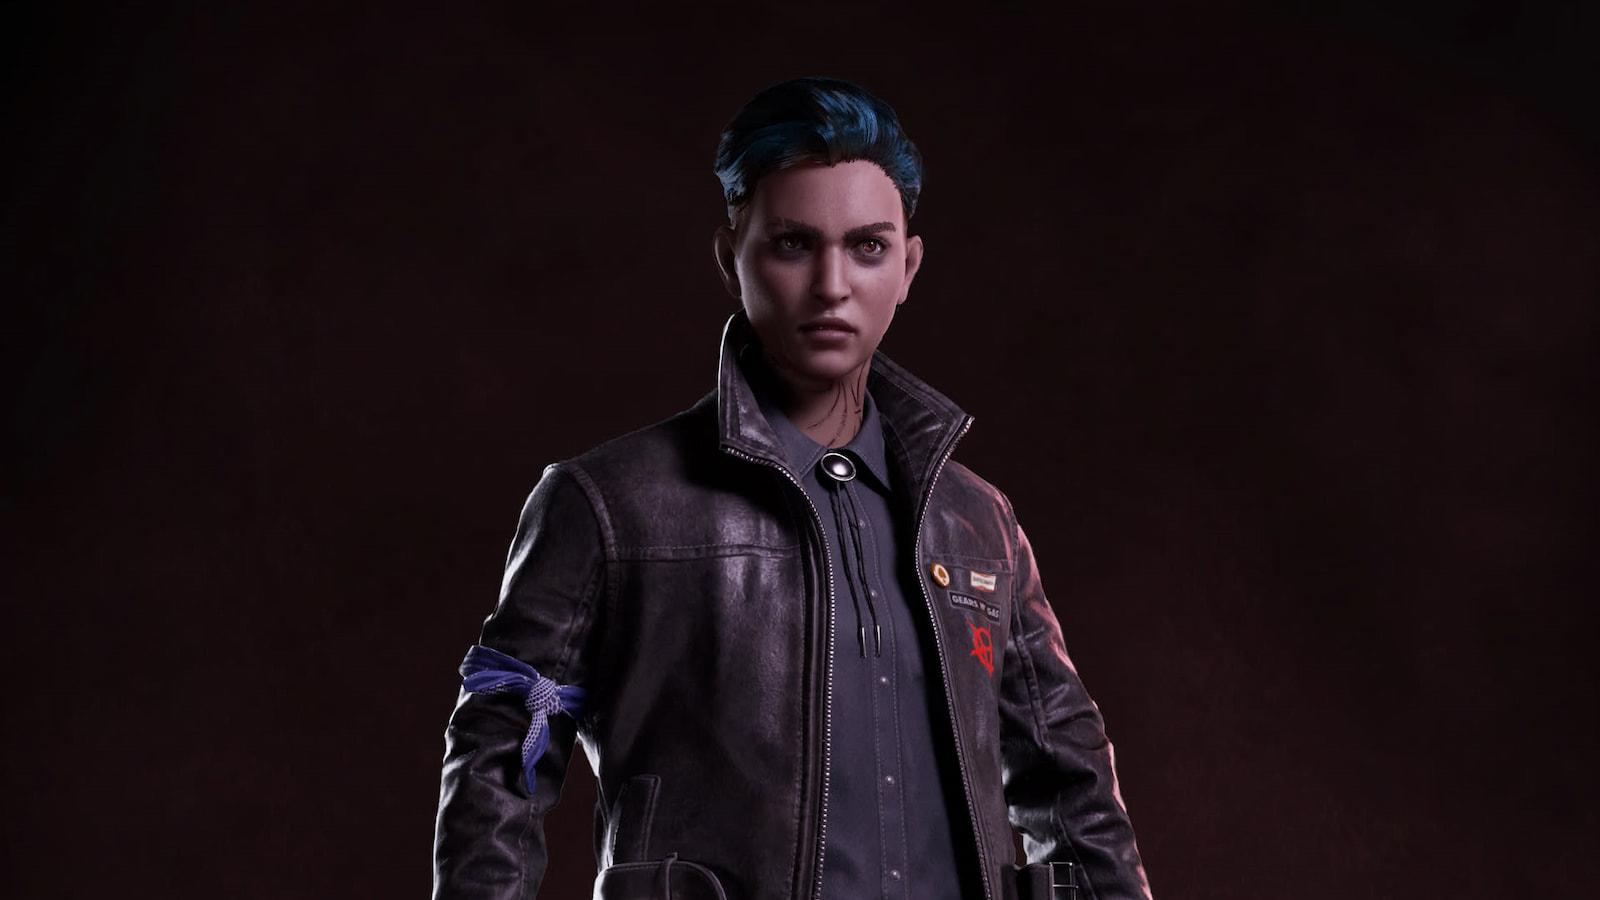 Brujah Phyre in Vampire: the Masquerade Bloodlines 2